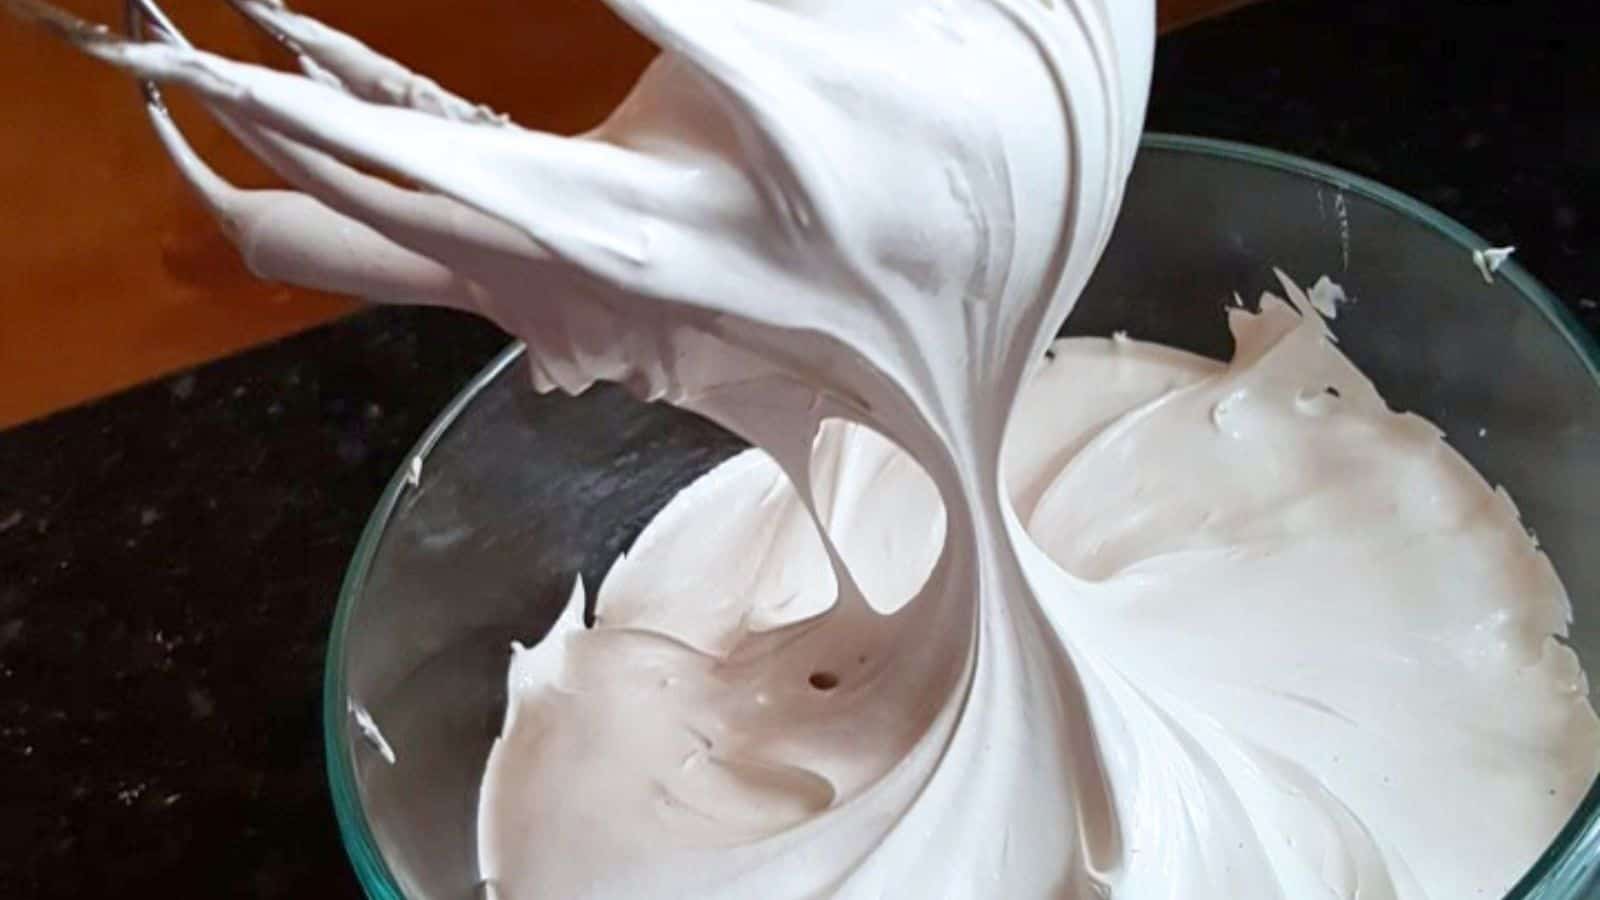 Image shows Stiff peaks of homemade marshmallow fluff being lifted from a glass bowl.